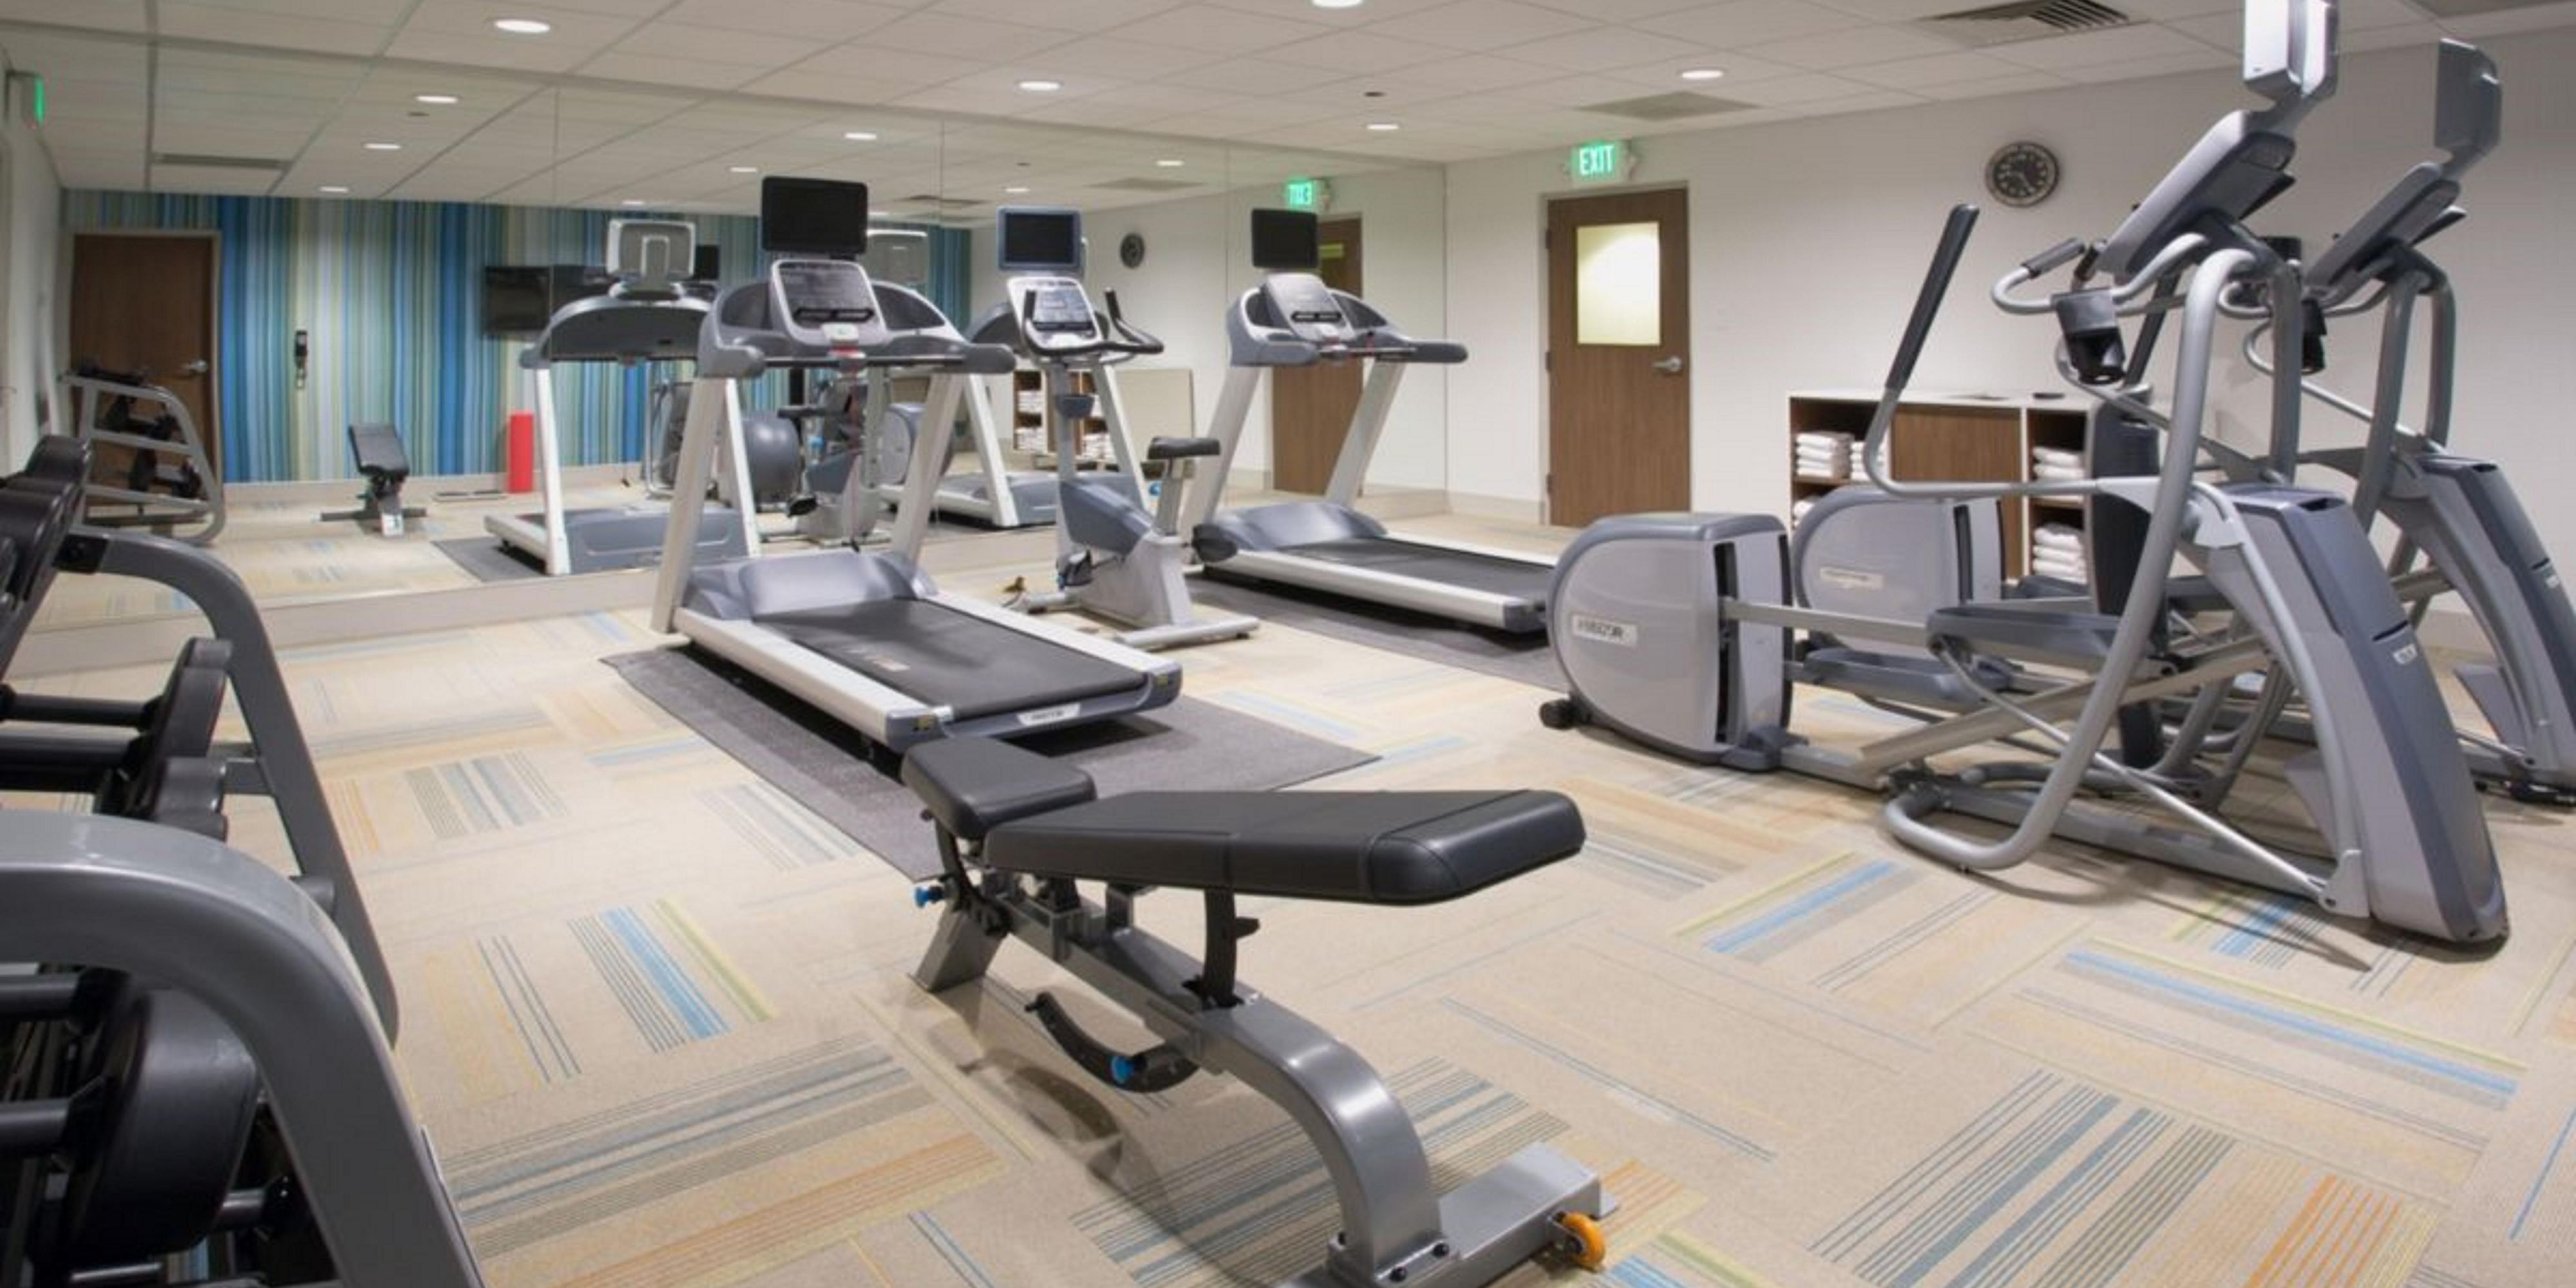 Fit travelers, don't sweat it, we've got you covered! You're welcome to go for a swim in our heated indoor pool or enjoy an invigorating workout in our complimentary Fitness Center. You'll find treadmills, elliptical machines, free weights or a stationary bicycle available just for you! Stay smart and fit when you sta